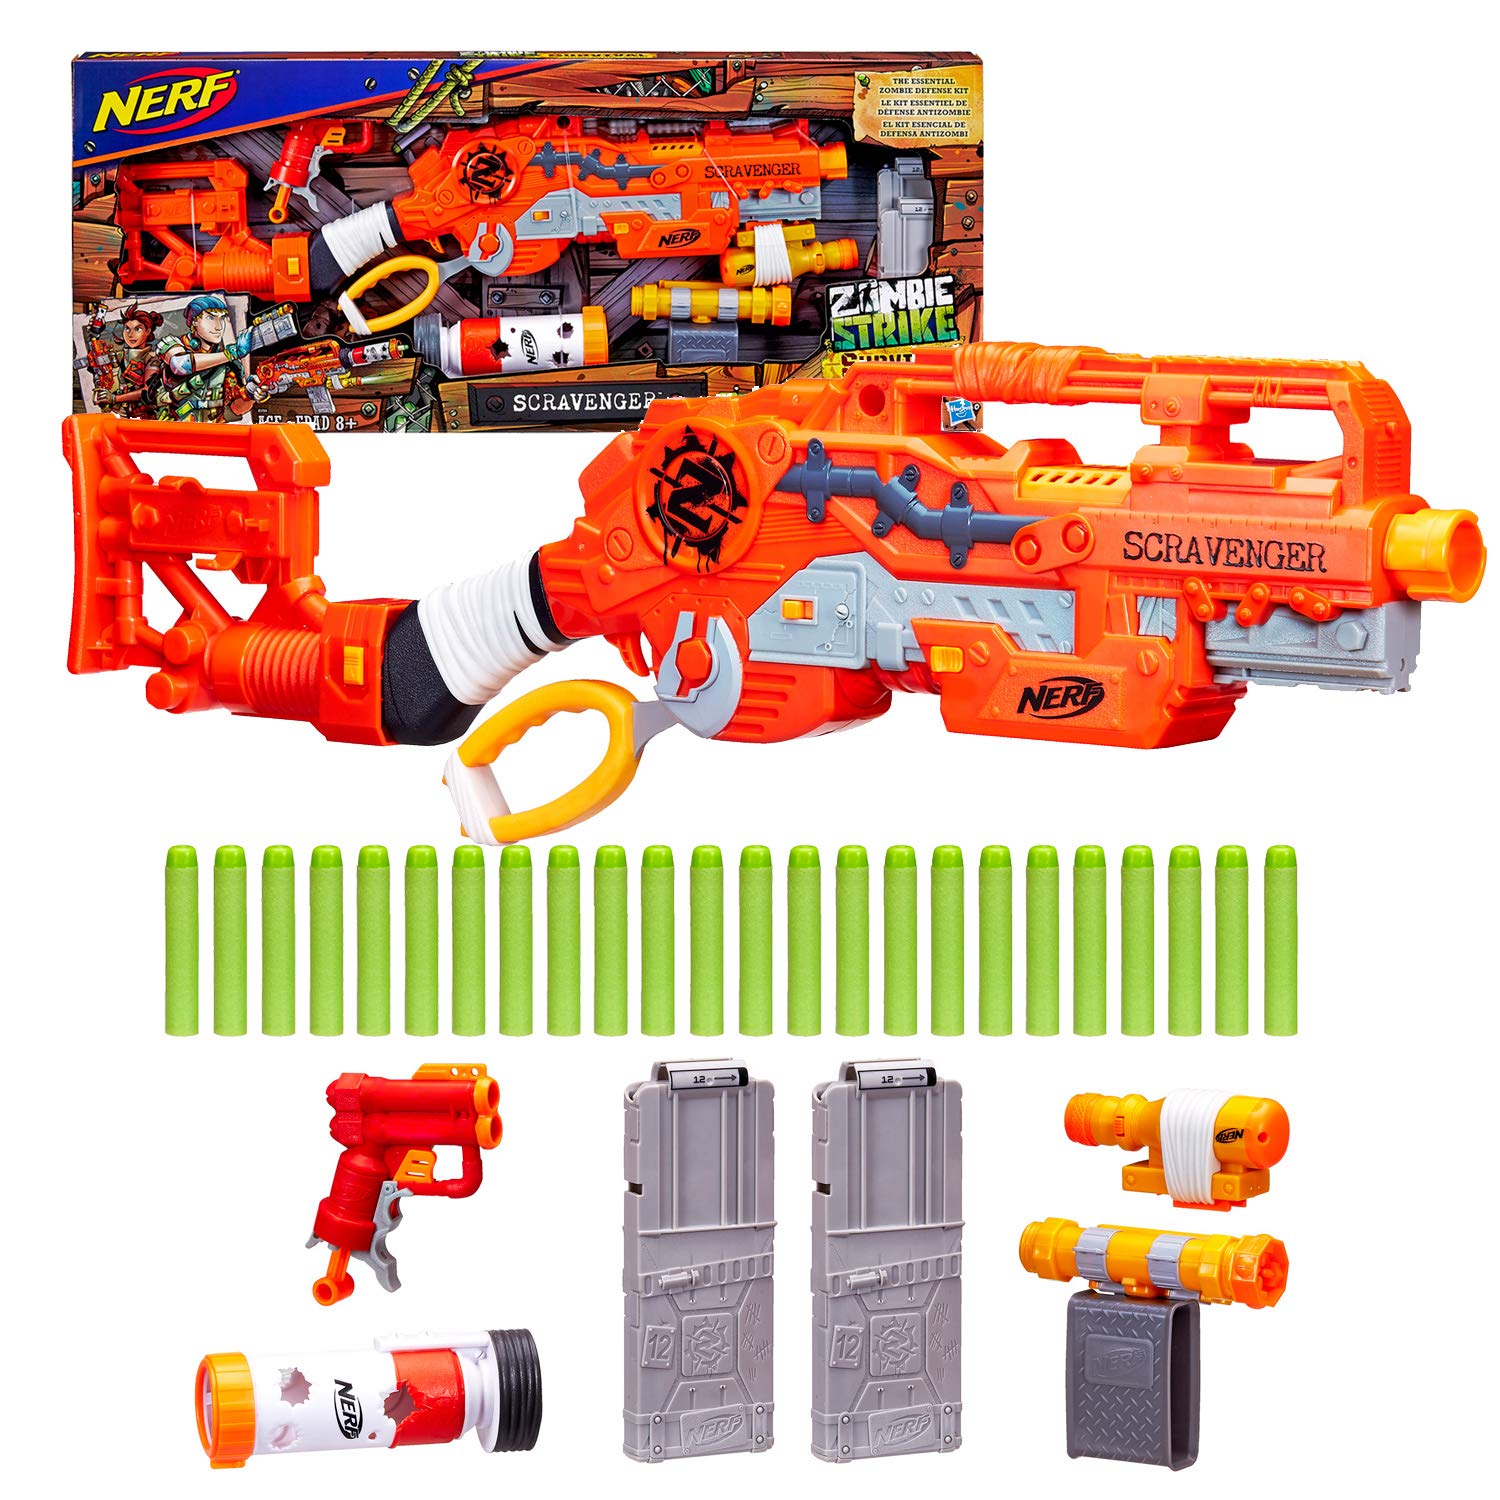 SCRAVENGER Nerf Zombie Strike Toy Blaster with two 12-dart Clips